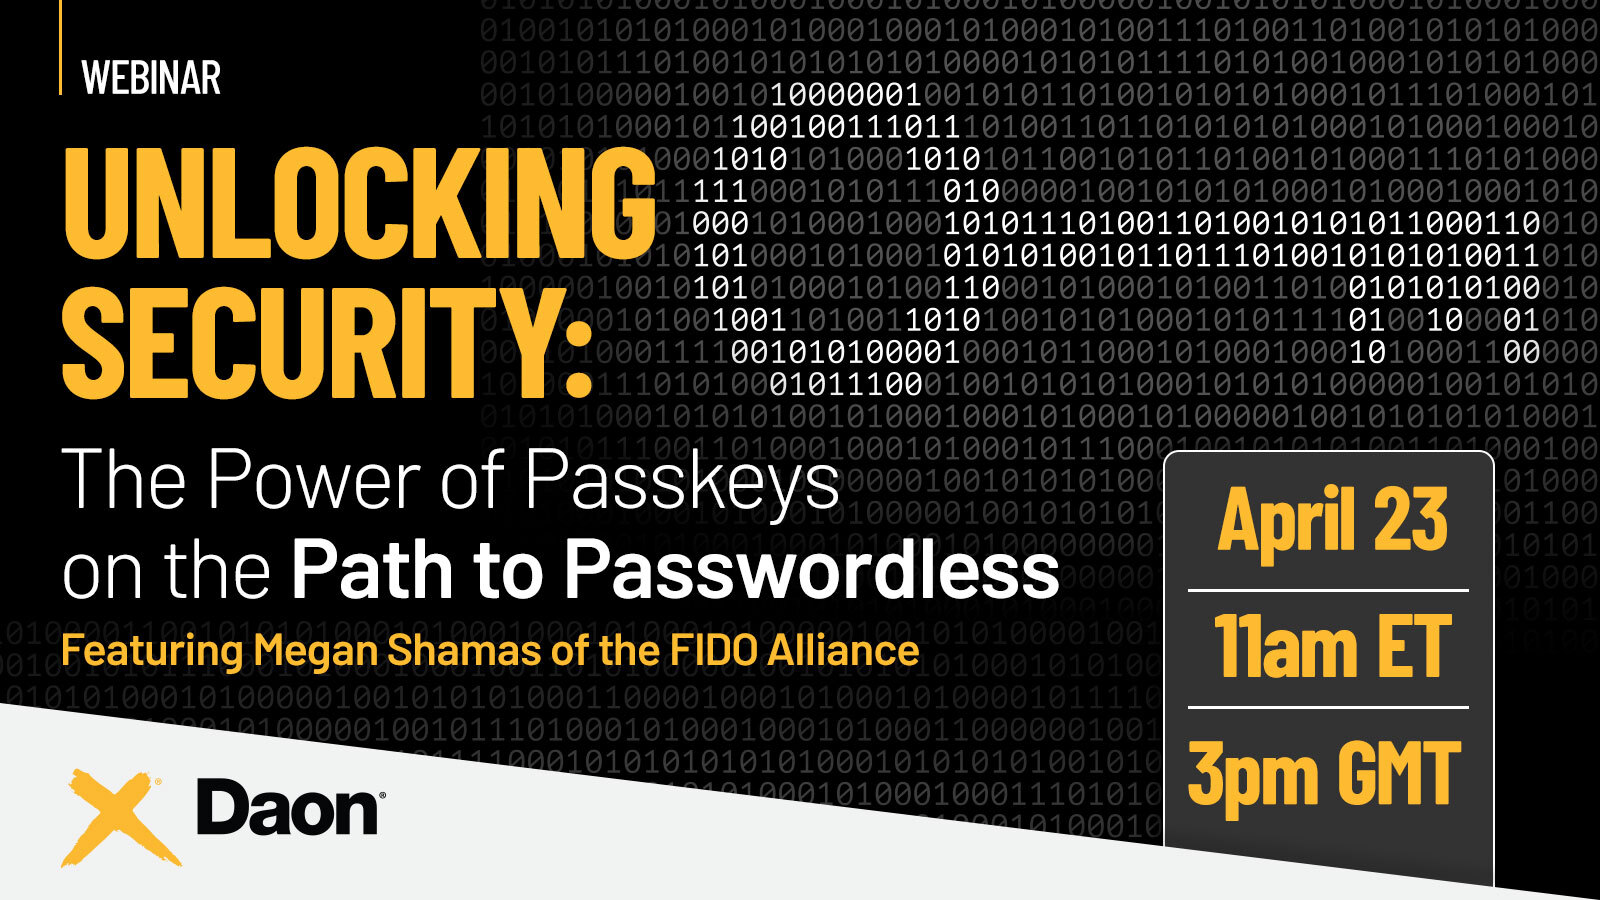 Member Webinar: Unlocking Security: The Power of Passkeys on the Path to Passwordless